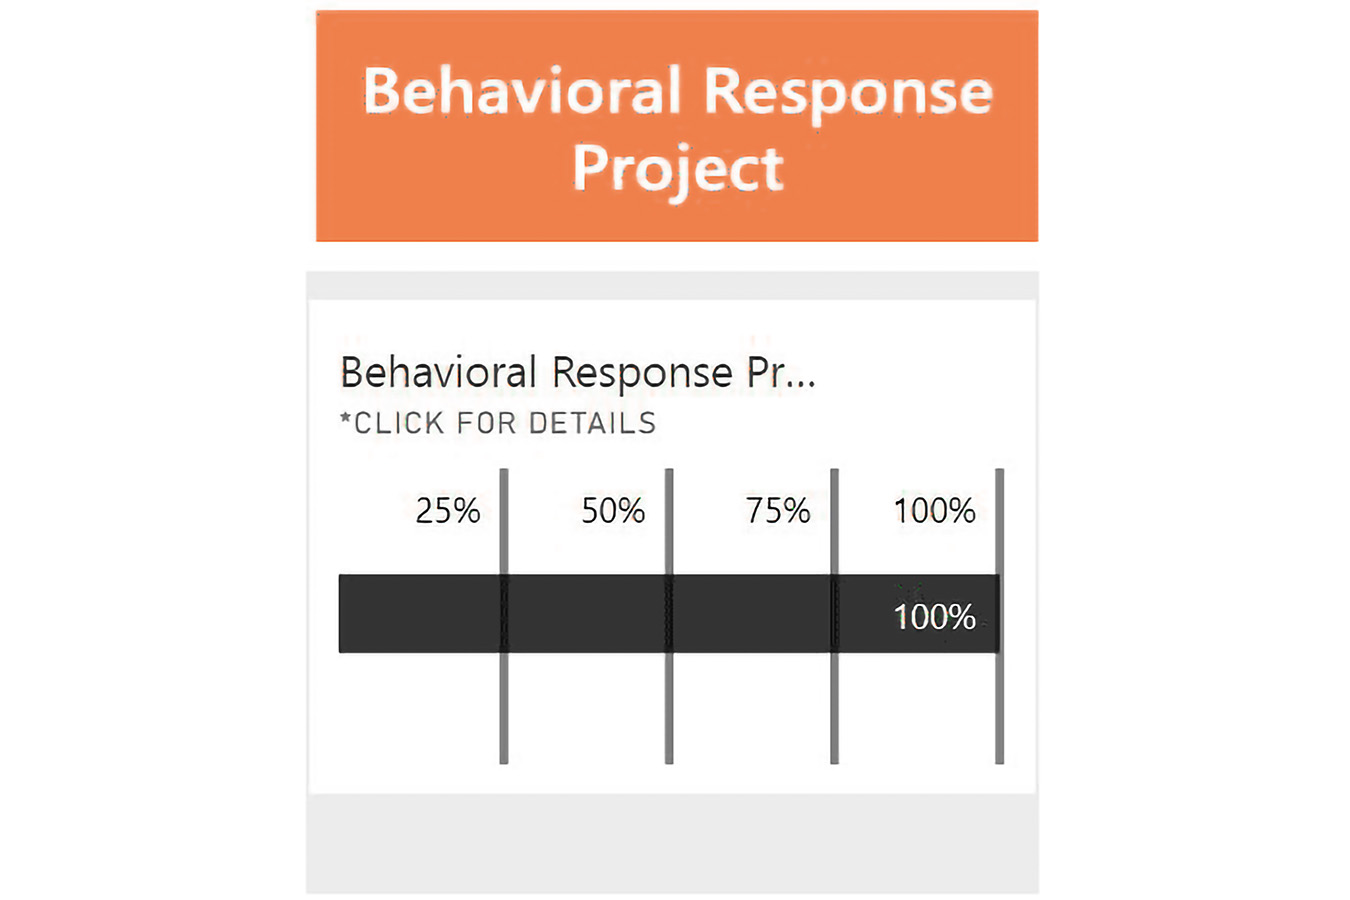 Behavioral Response Project is at 100% project completion